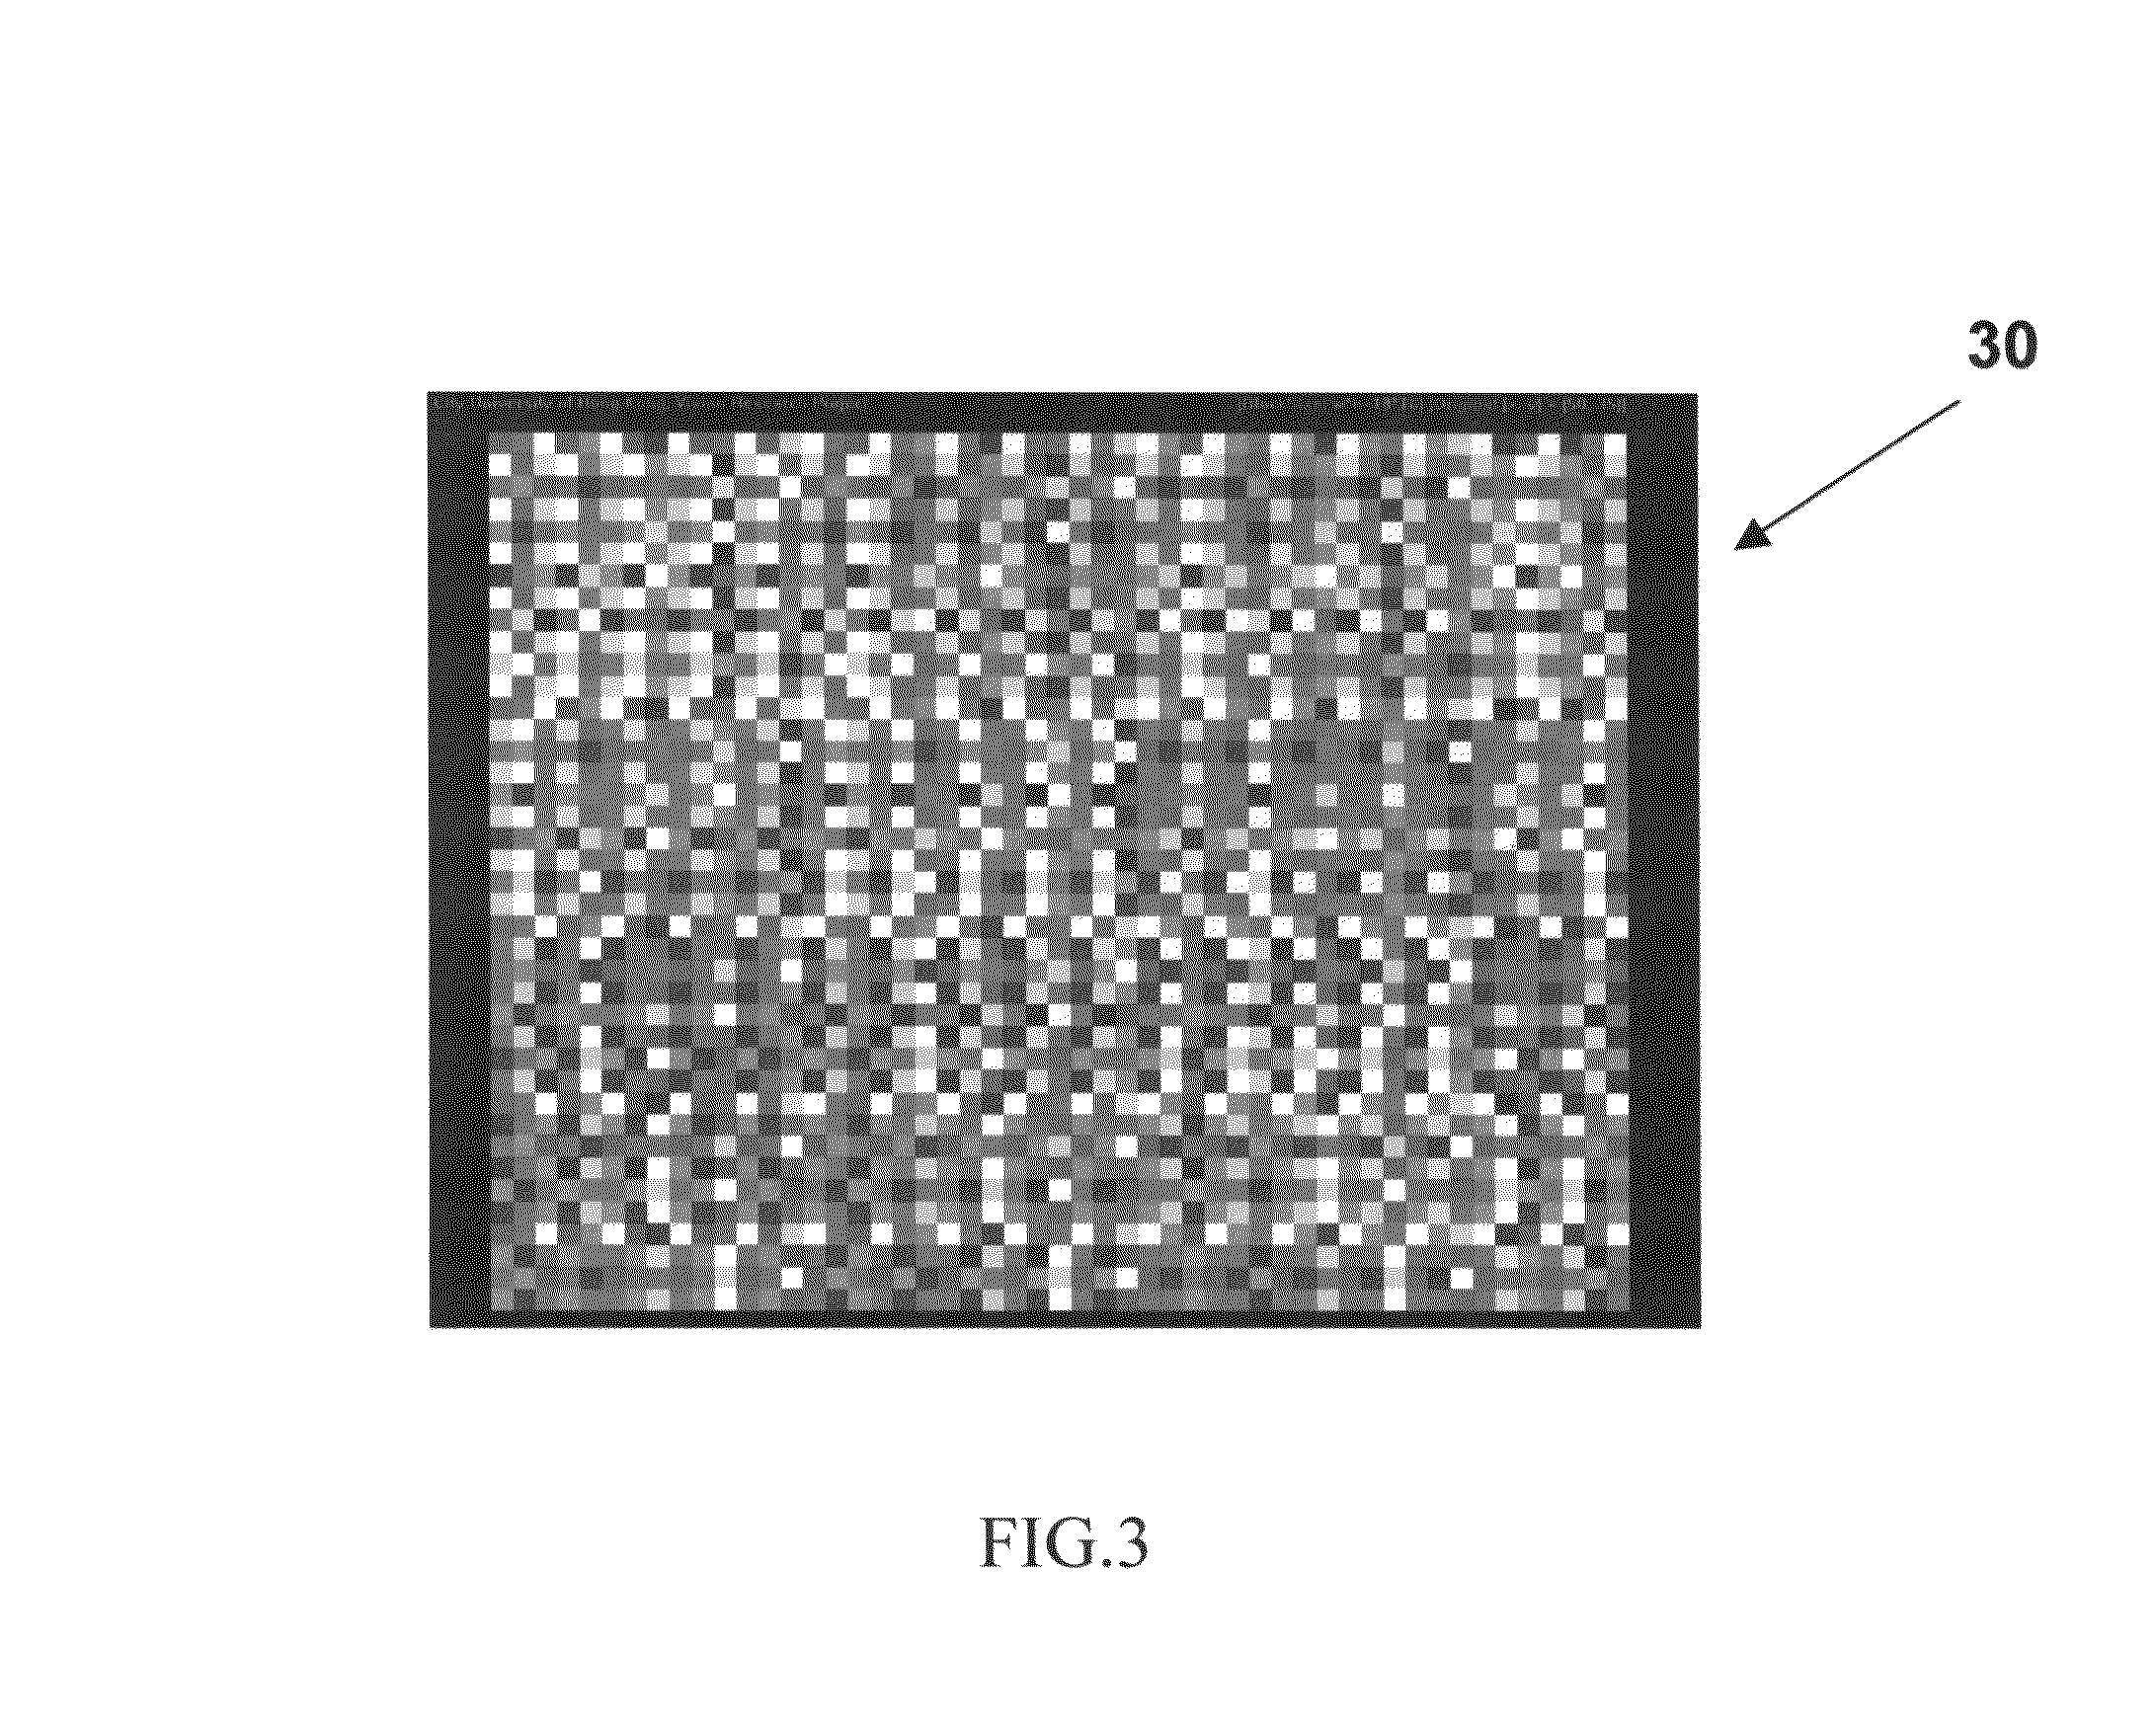 Auto-calibration method for a projector-camera system